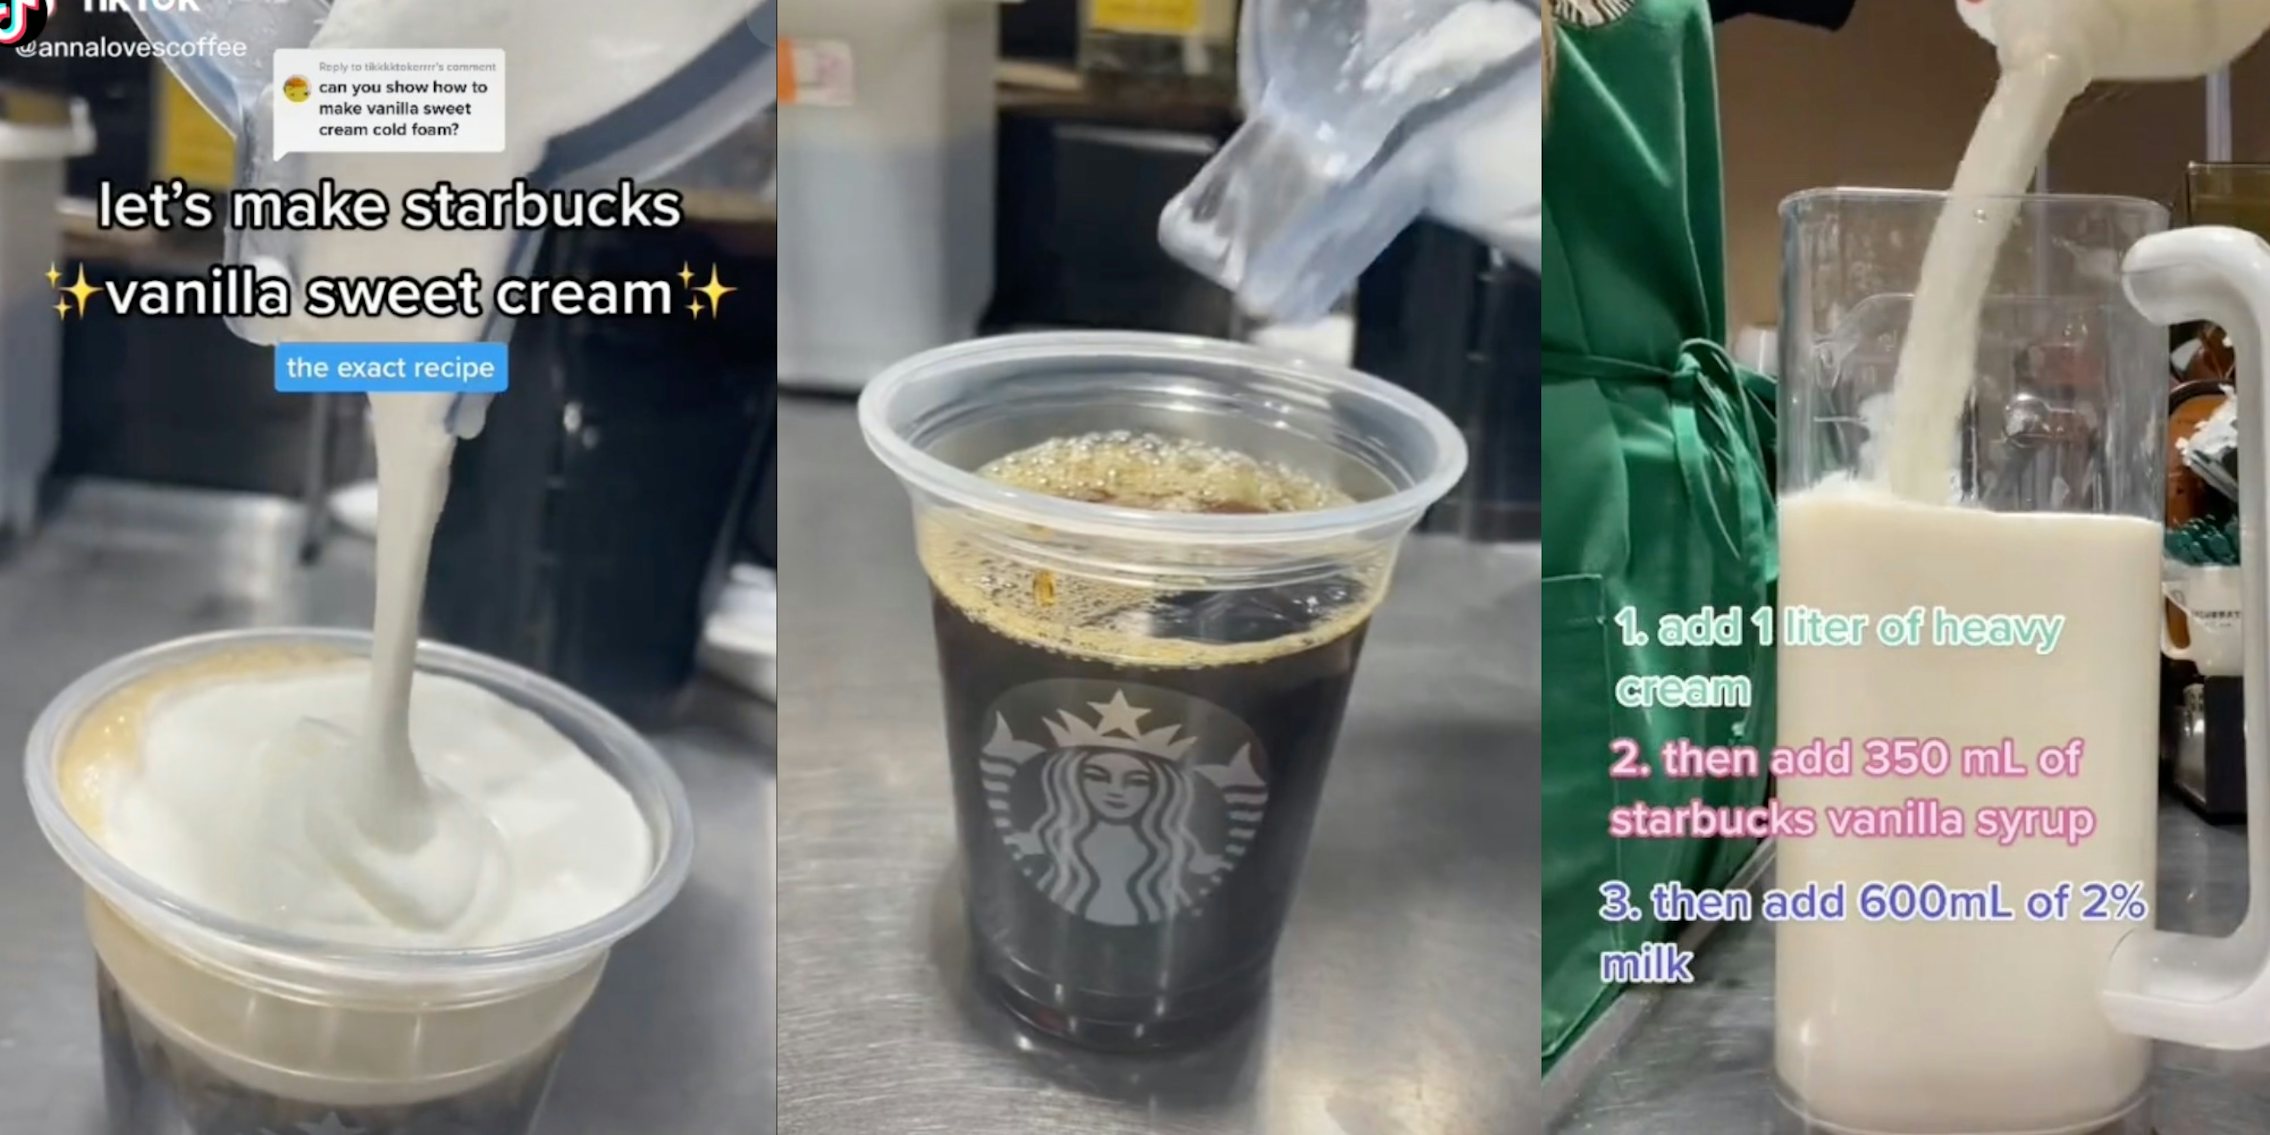 How to make Starbucks sweet cream cold foam at home